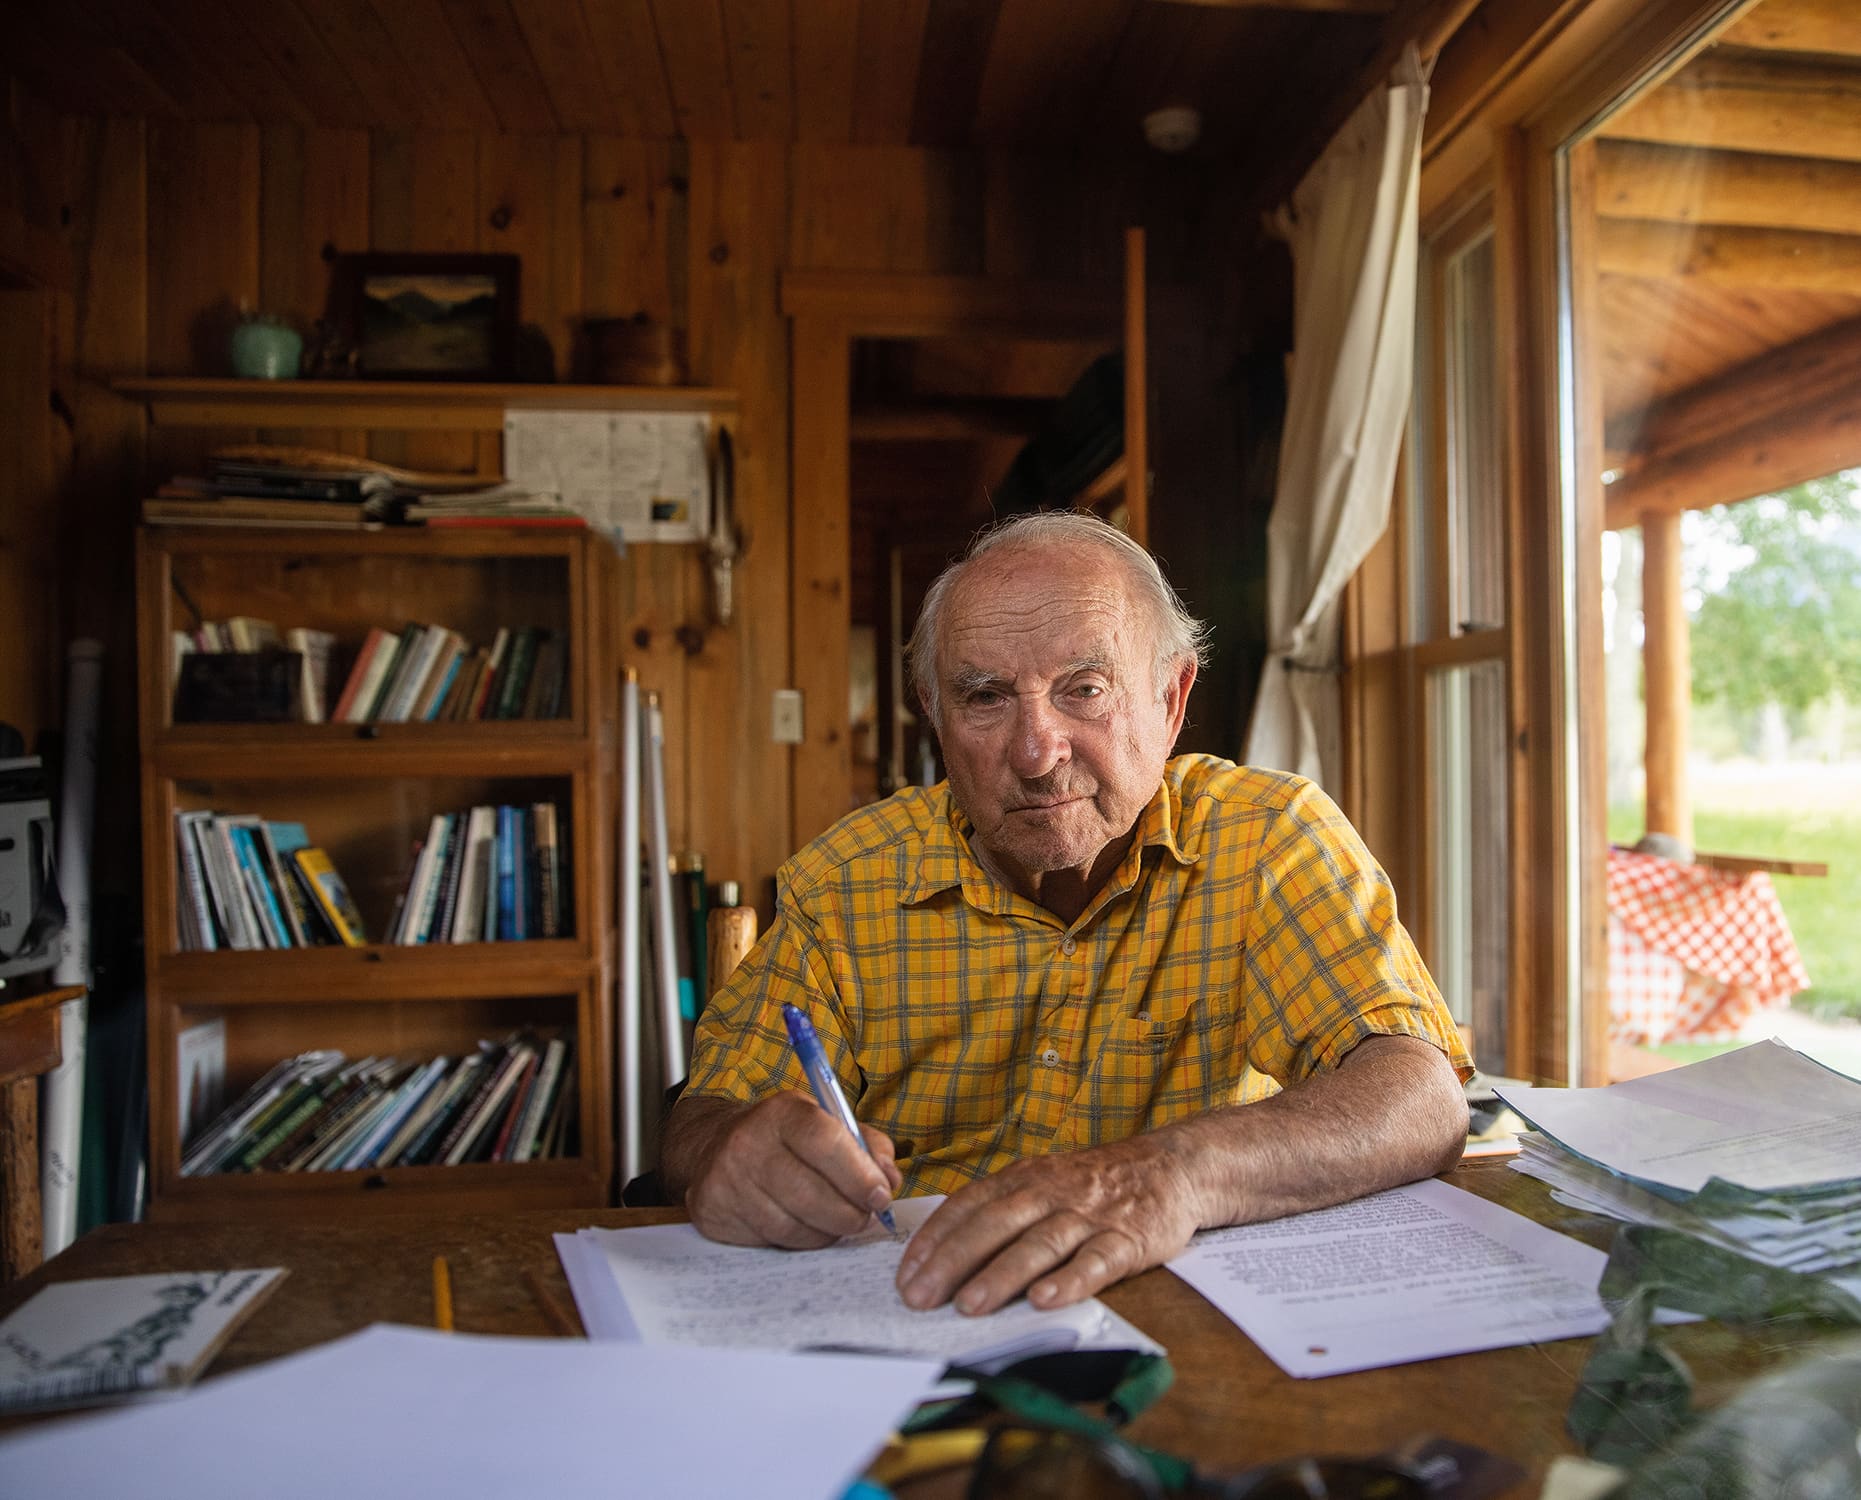 Patagonia founder Yvon Chouinard sits at his desk in his wood-clad office